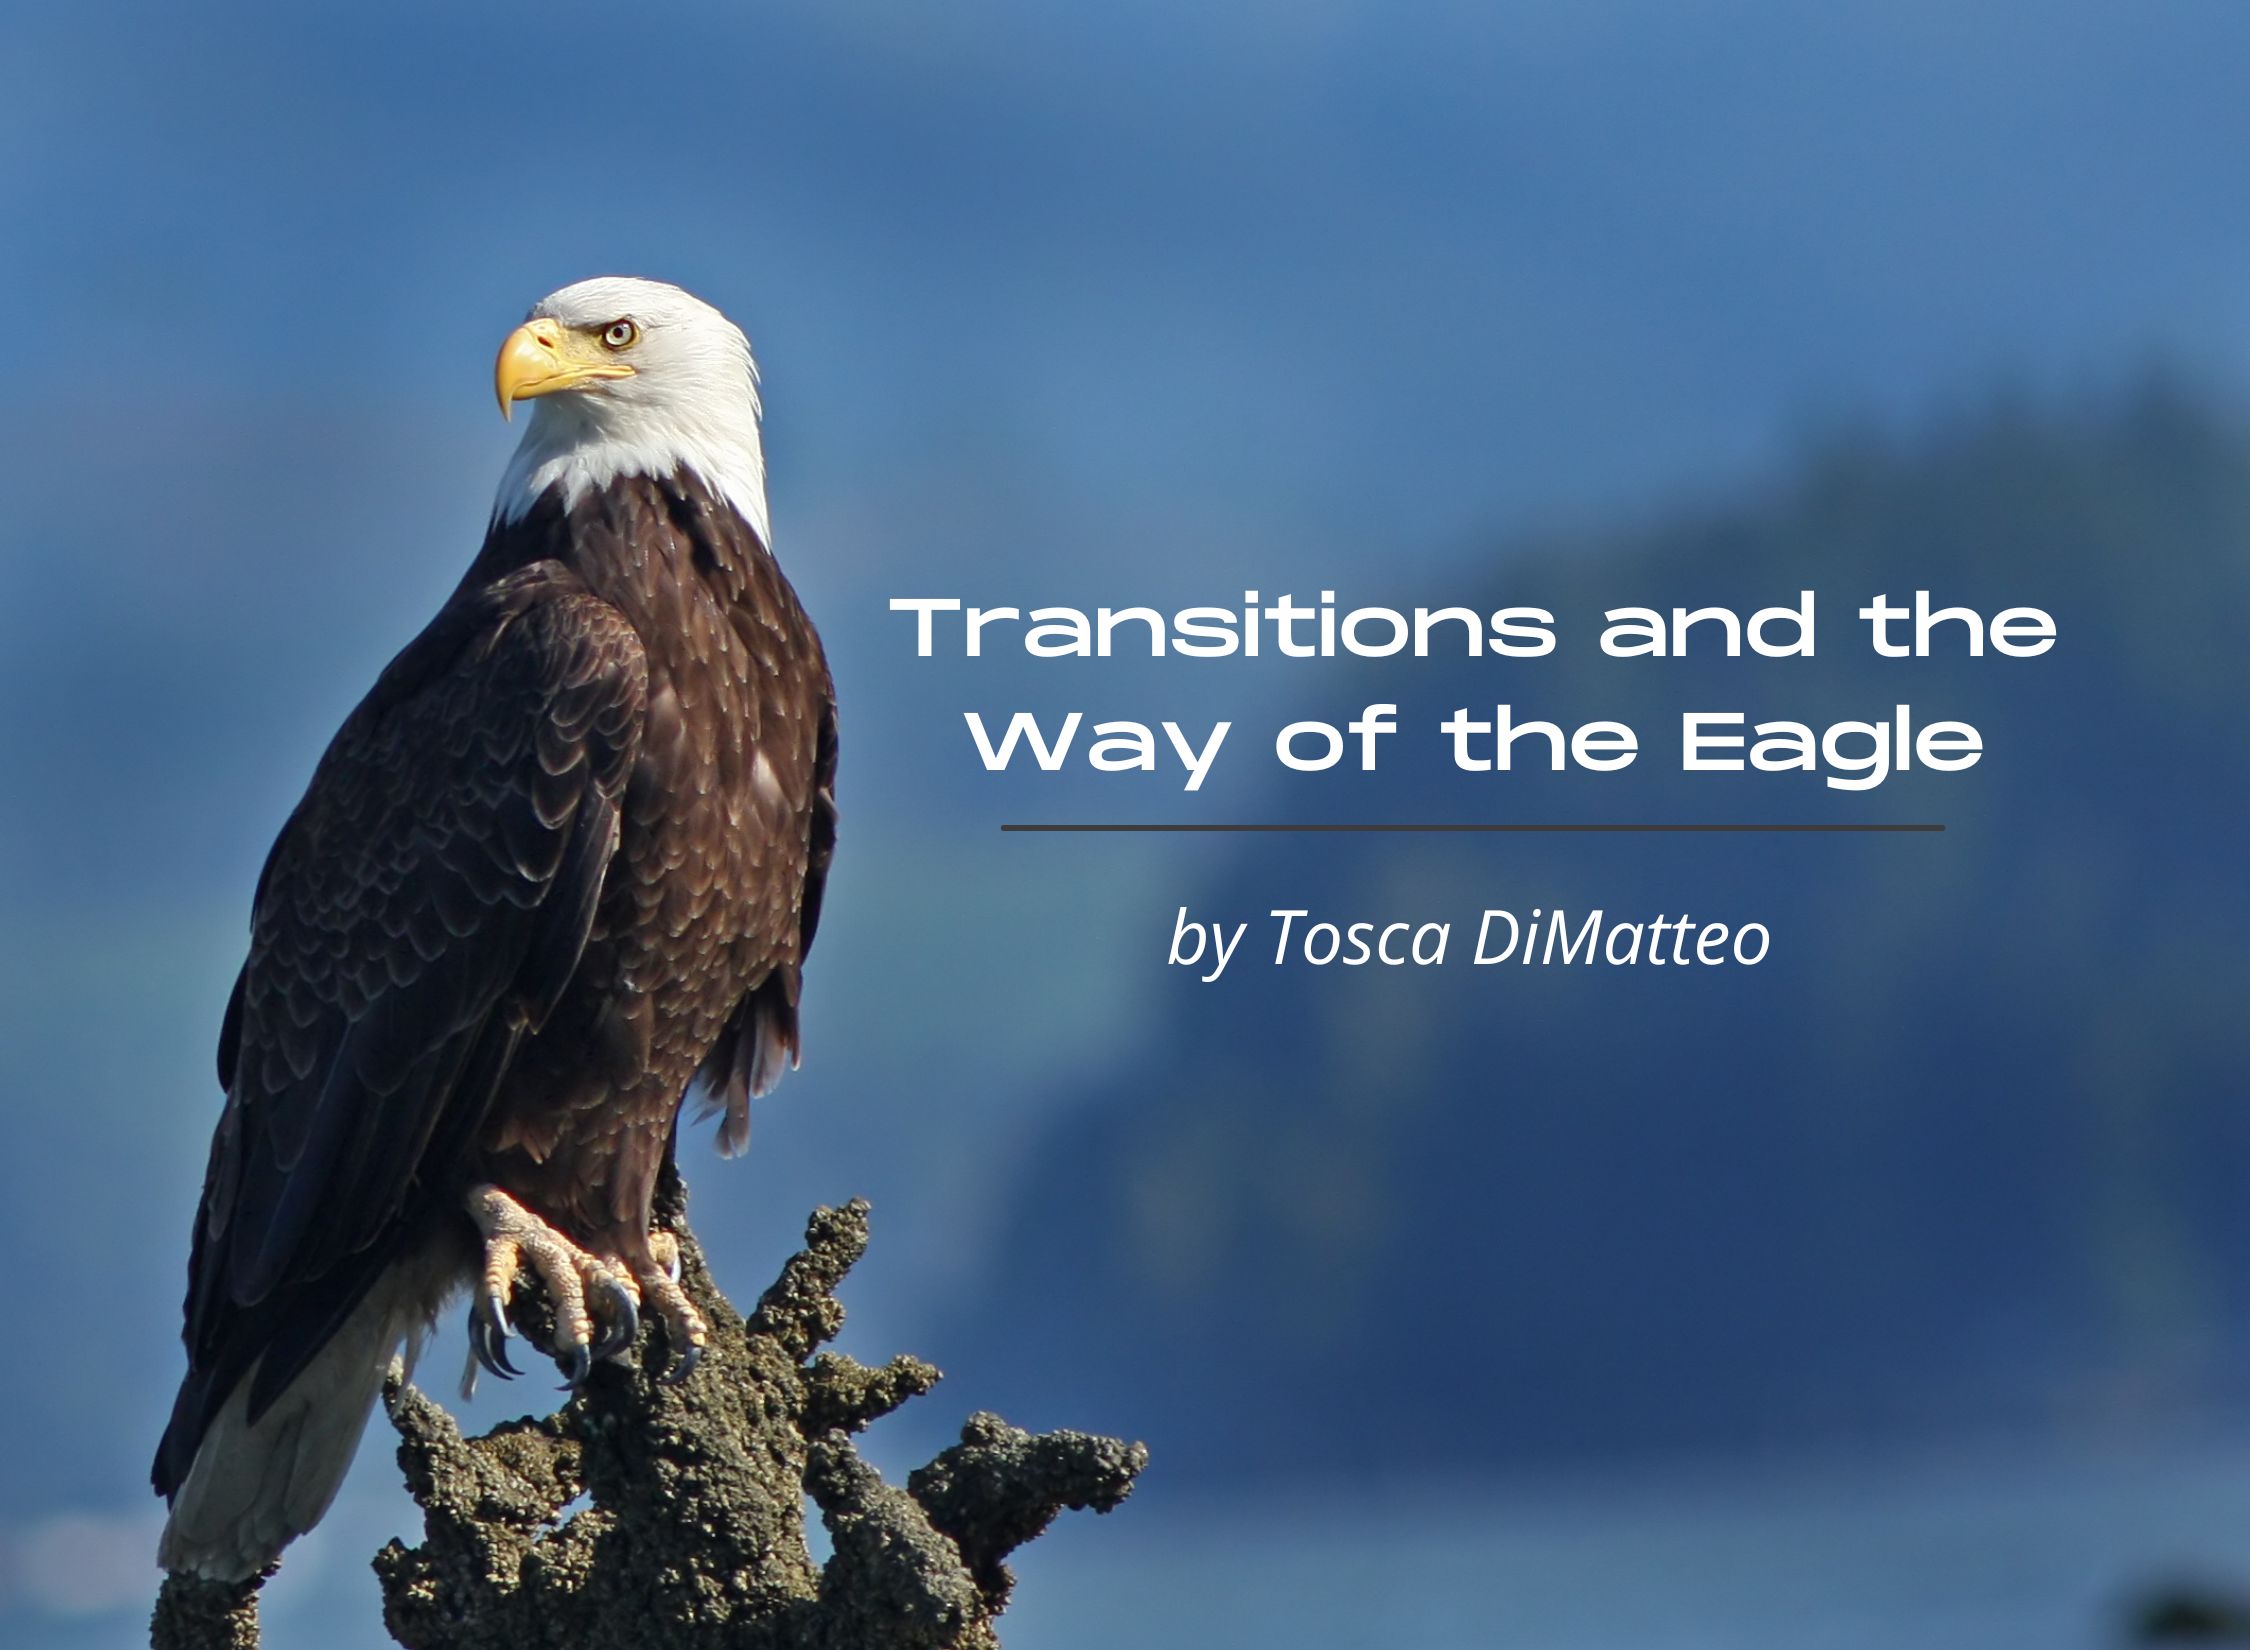 Transitions and the Way of the Eagle